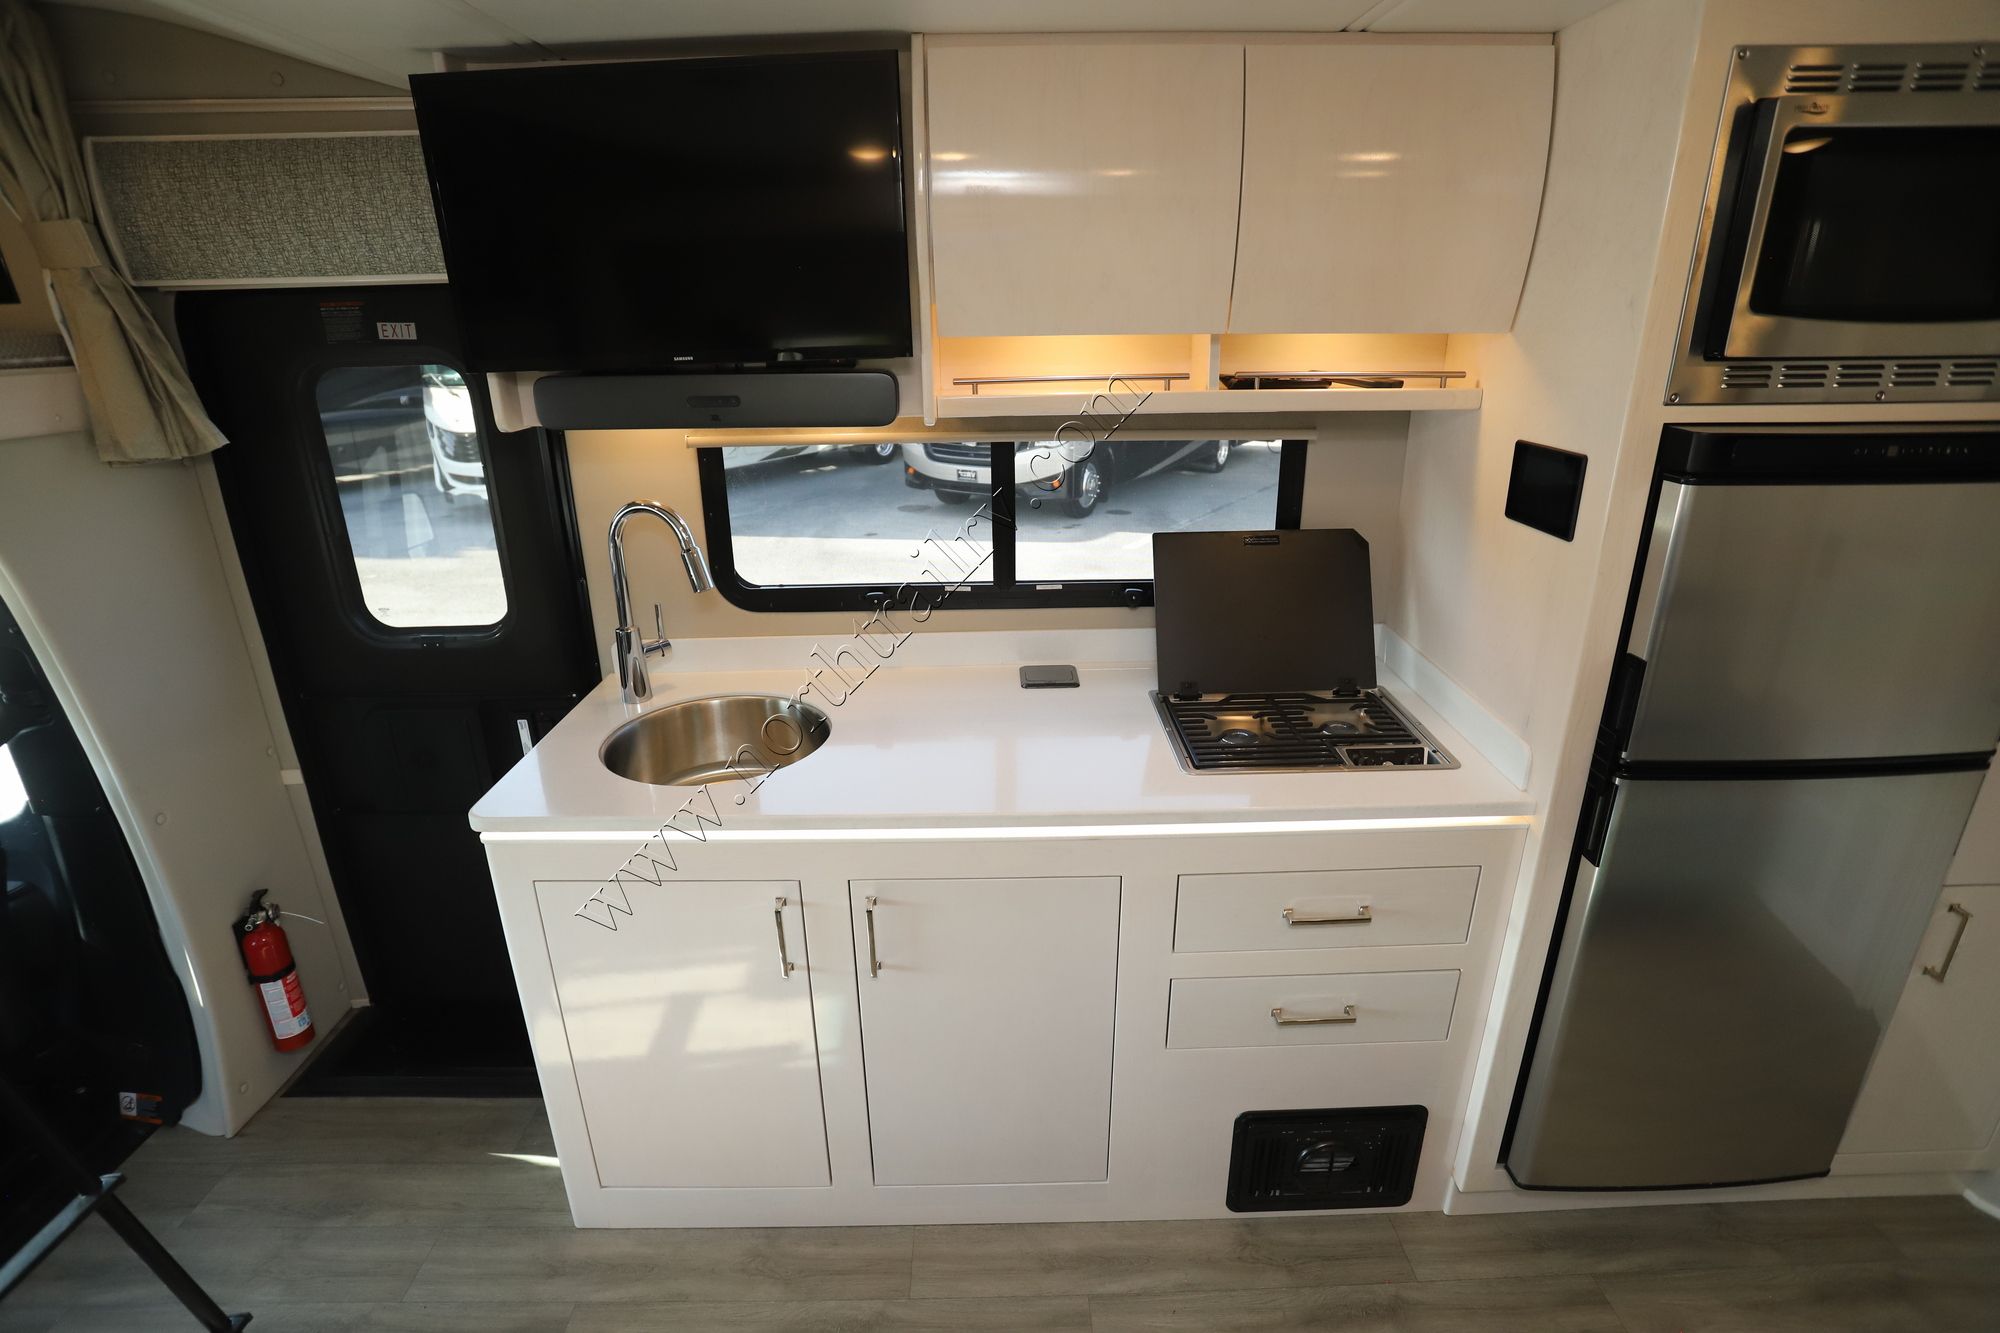 Used 2023 Renegade Rv Vienna 25RMC Class C  For Sale